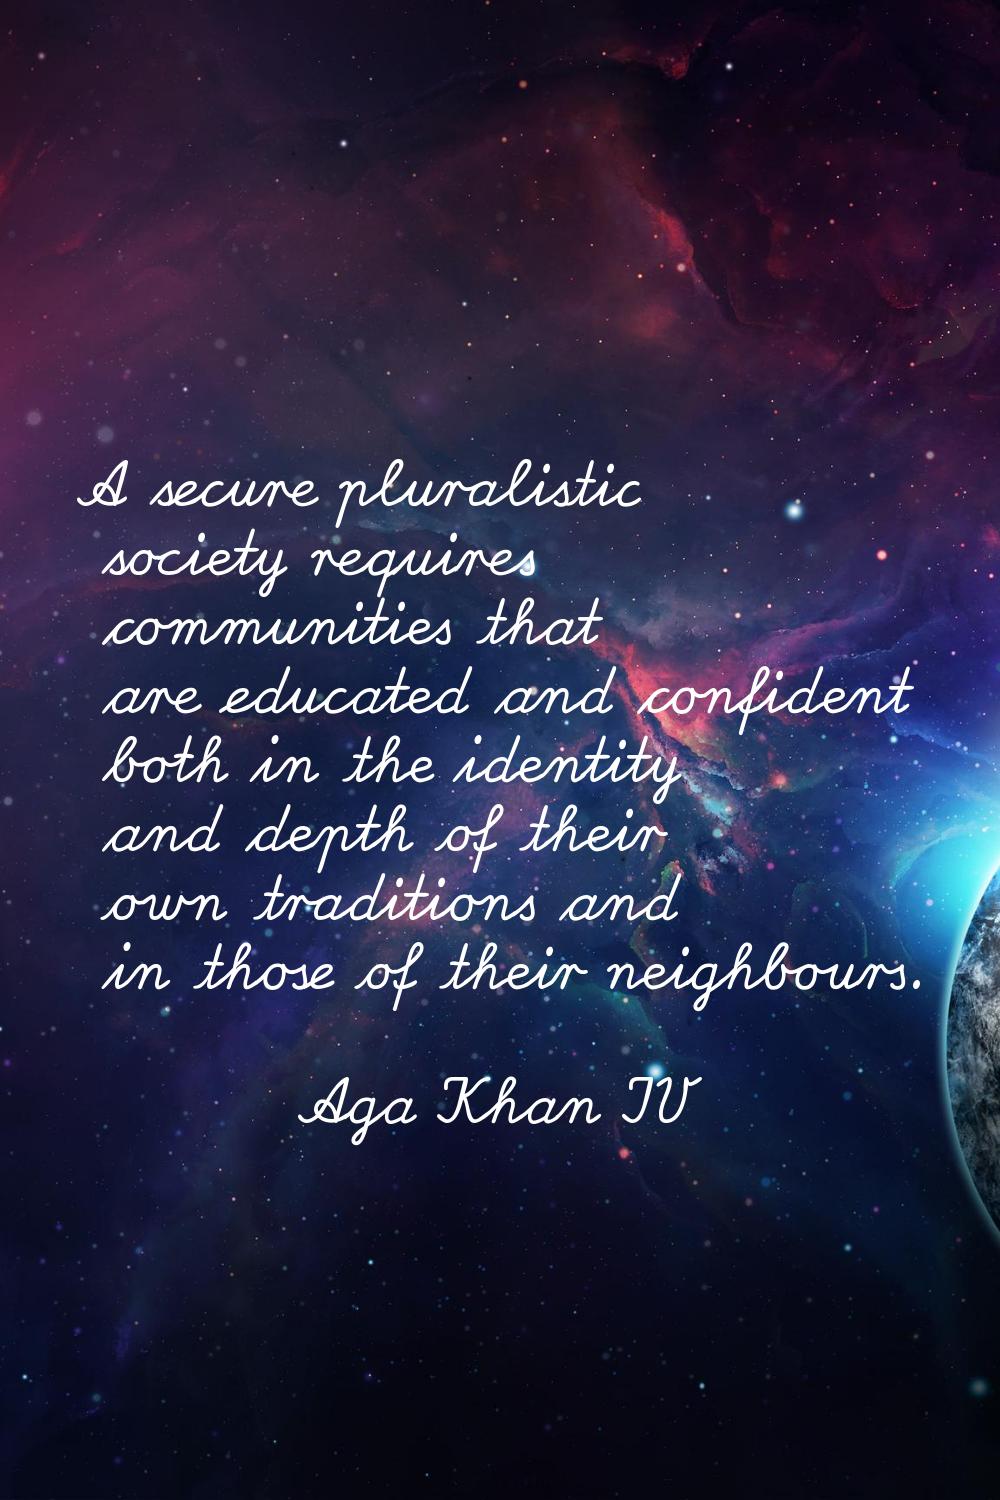 A secure pluralistic society requires communities that are educated and confident both in the ident